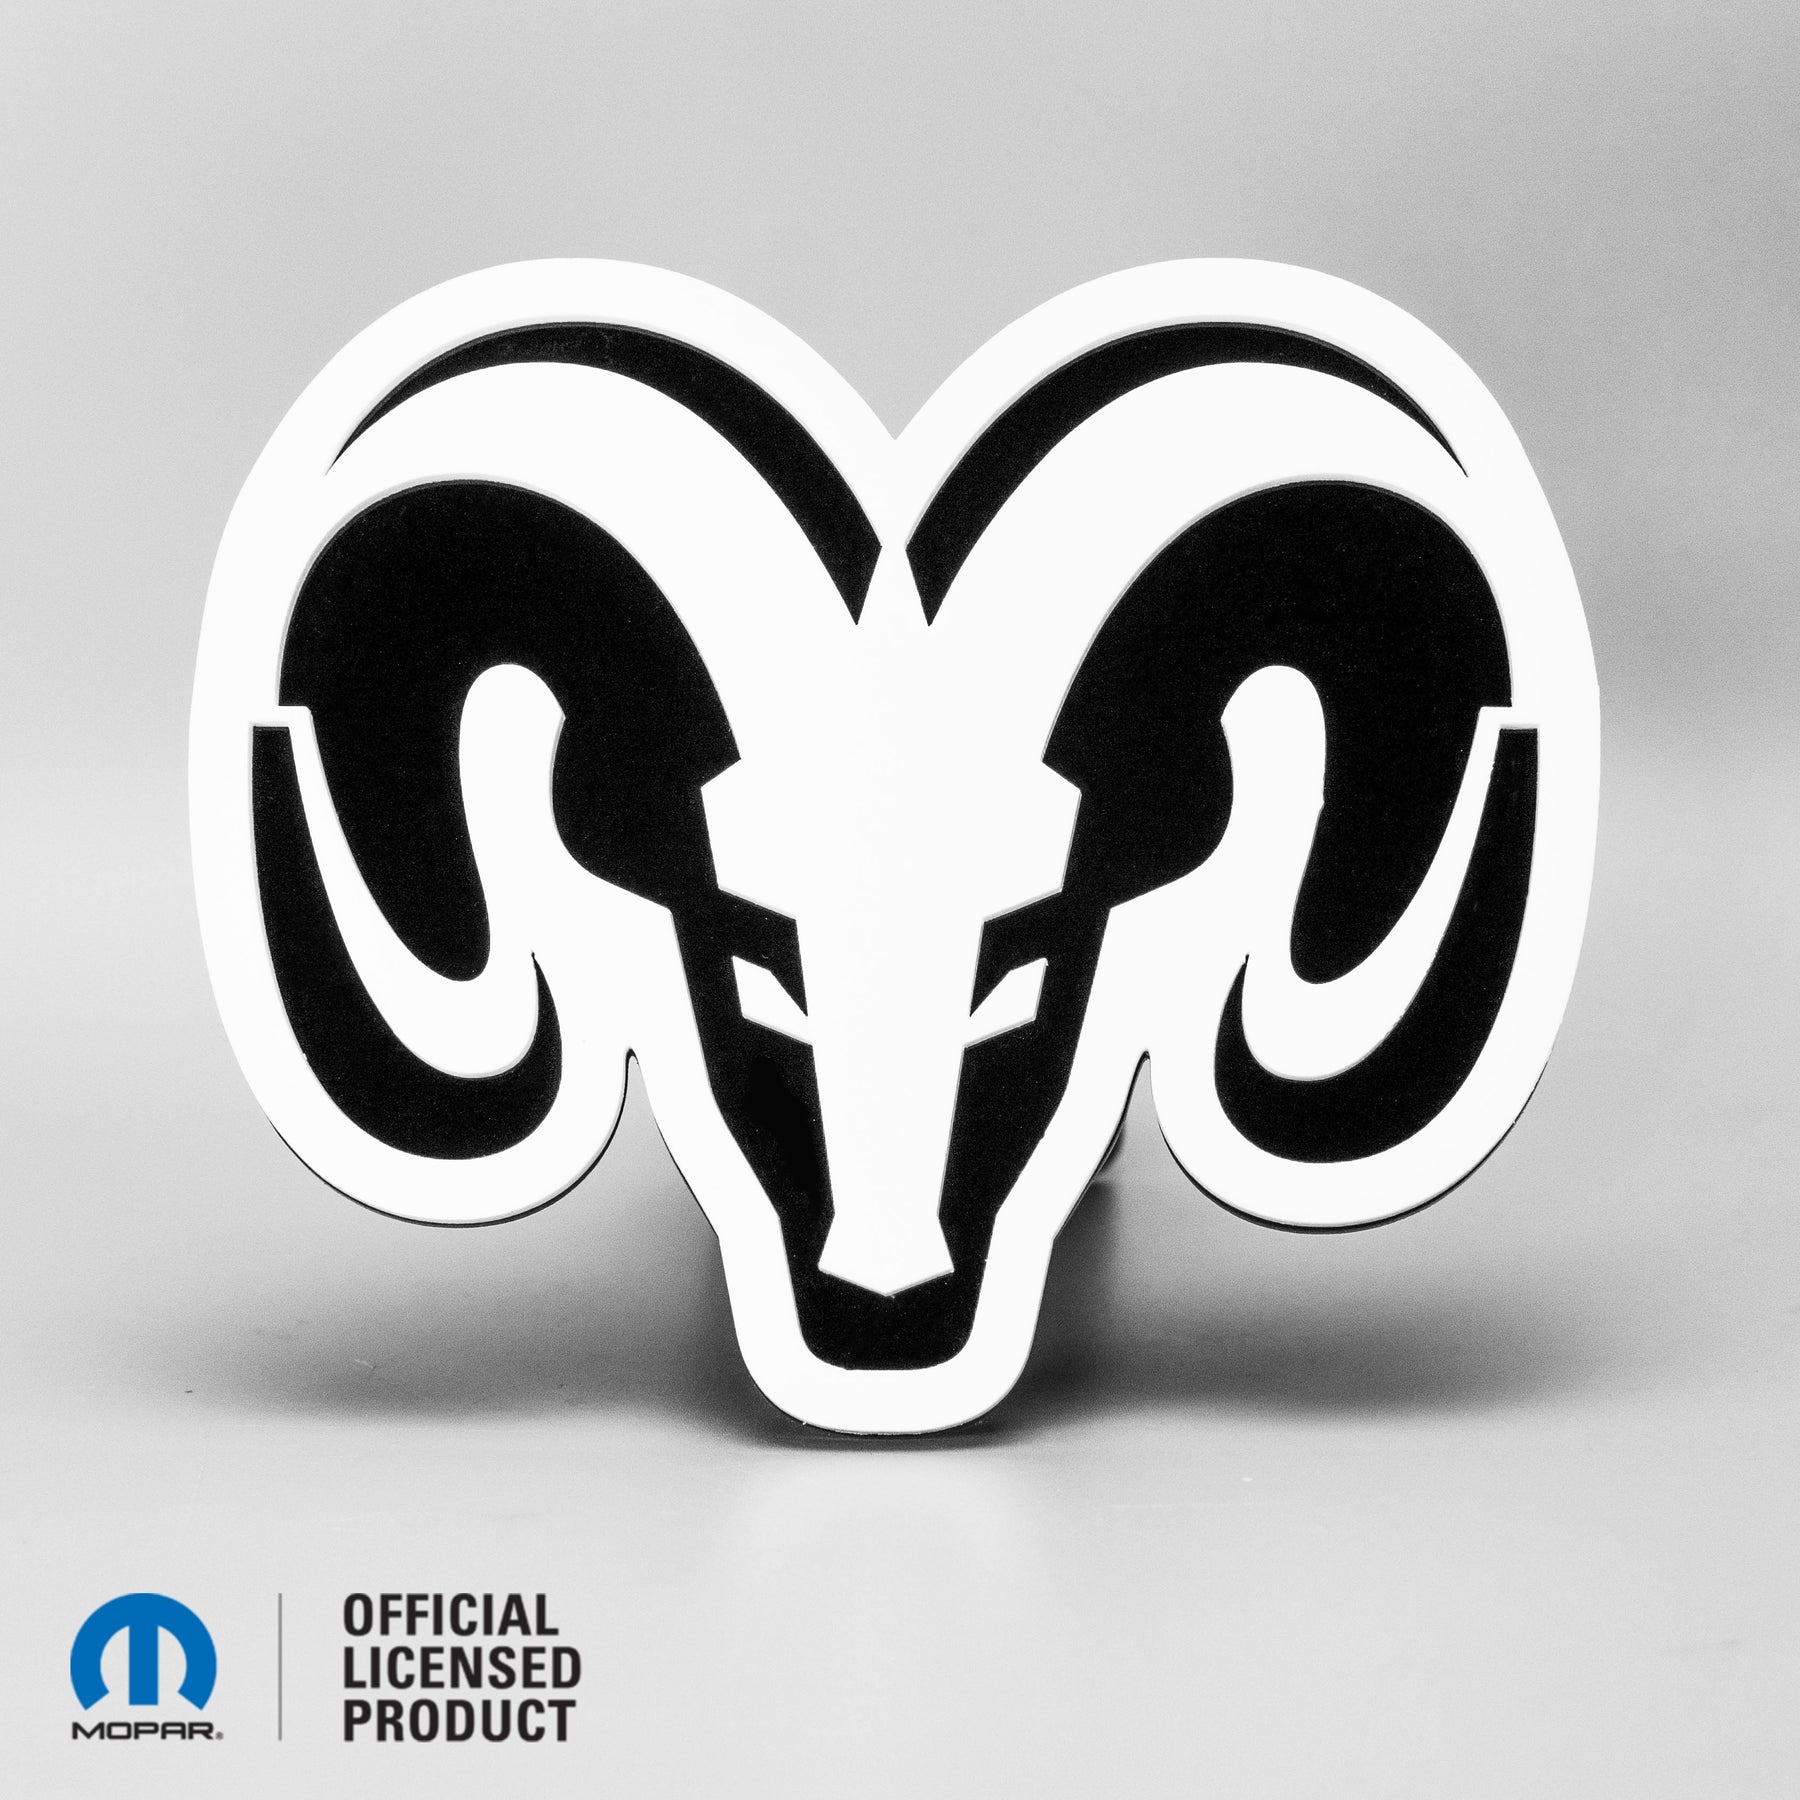 RAM® HEAD LOGO STYLE 1 - HITCH COVER - White on Gloss - Officially Licensed Product